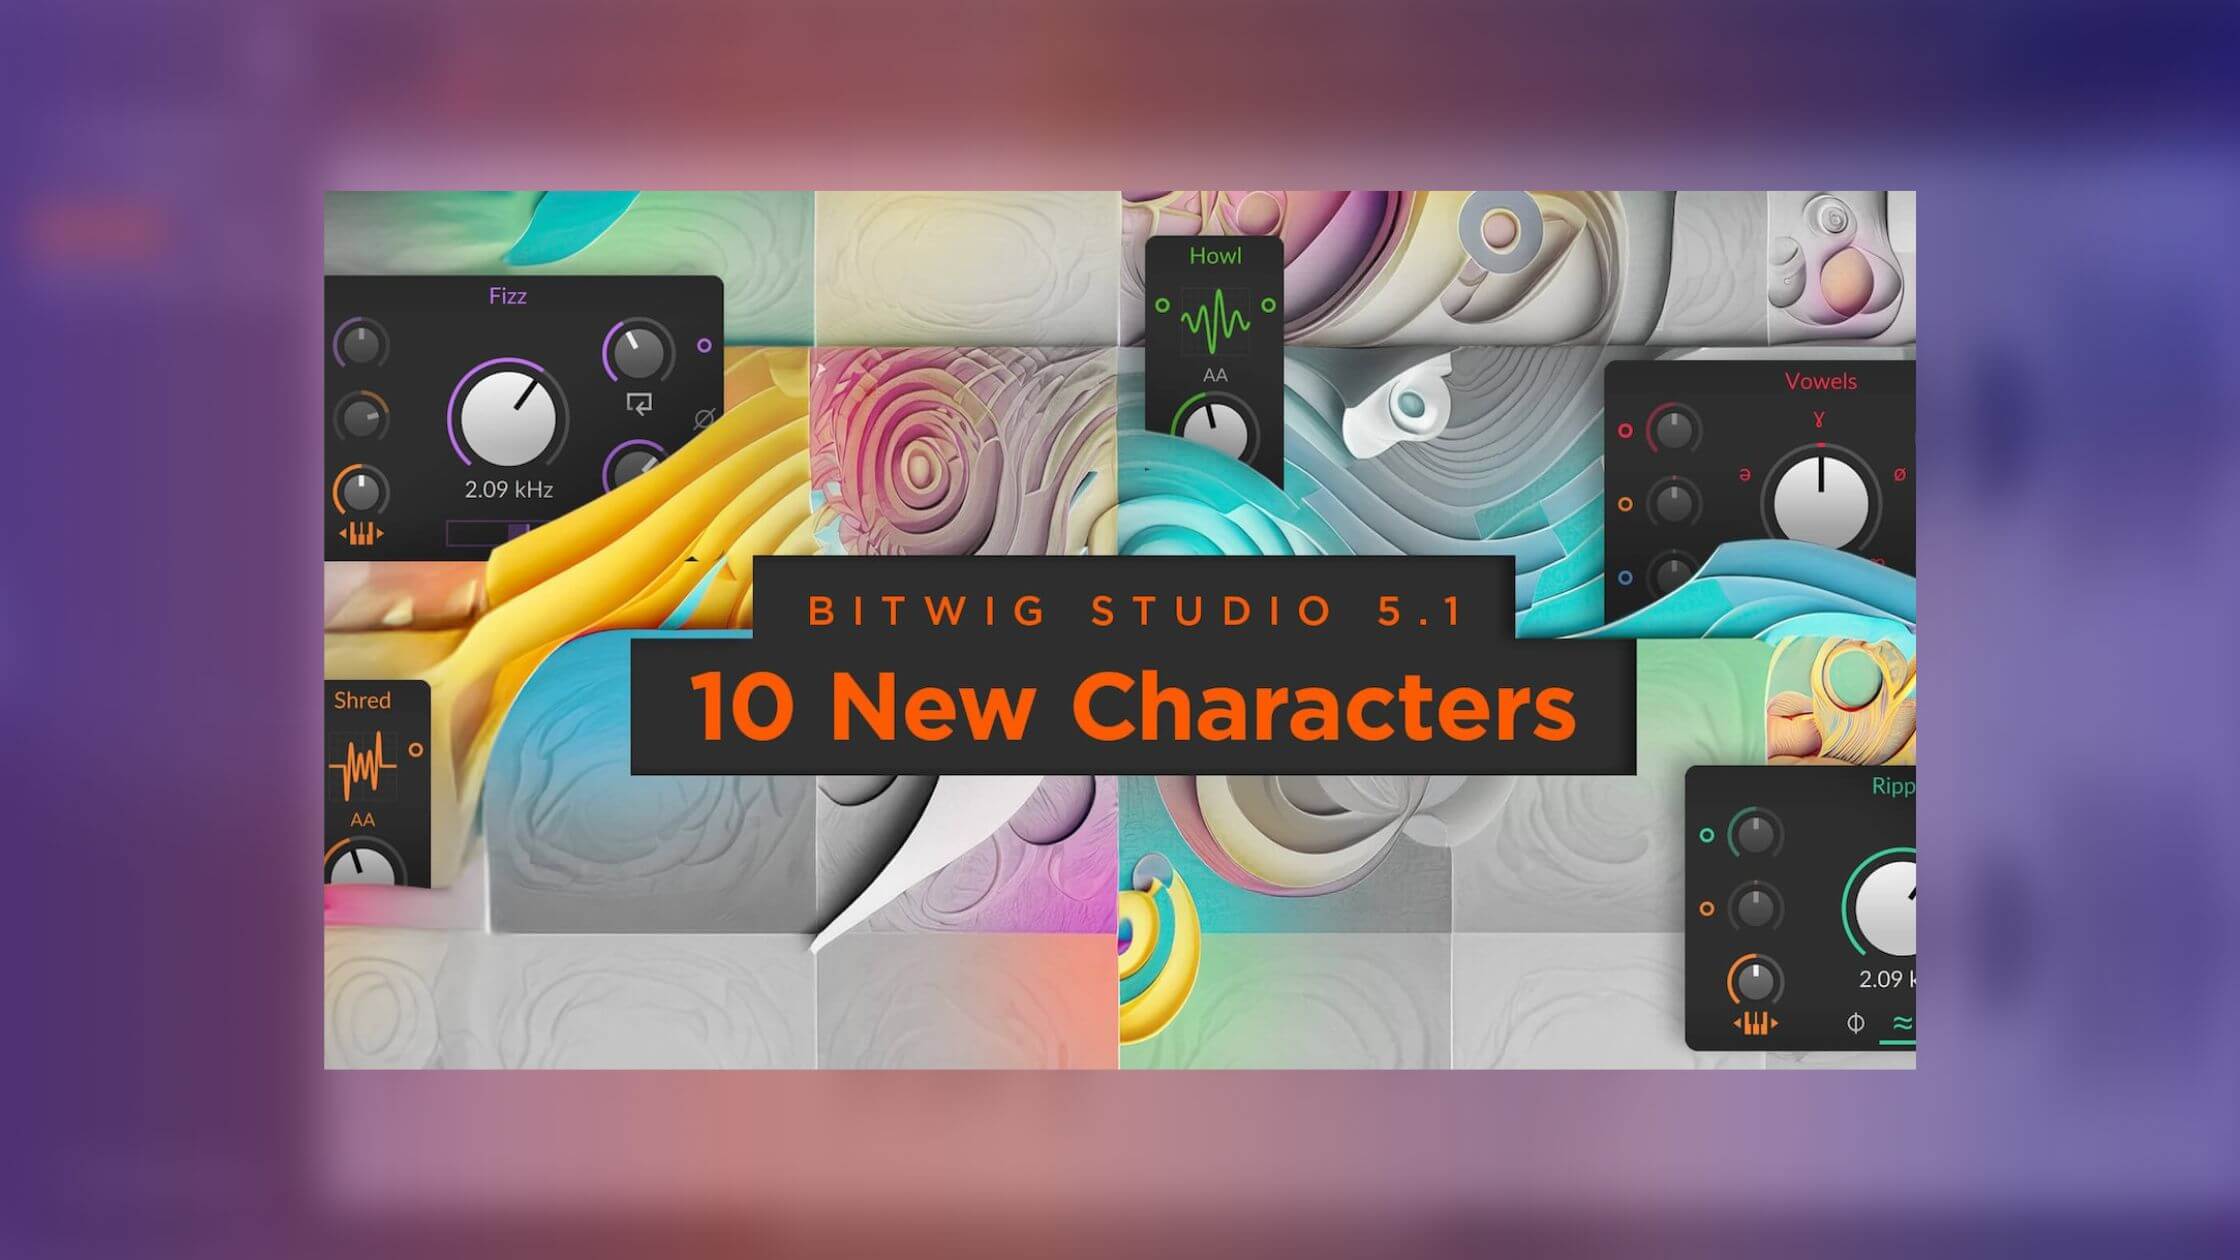 Bitwig Studio 5.1: new filters, waveshapers, and more for complex sound design